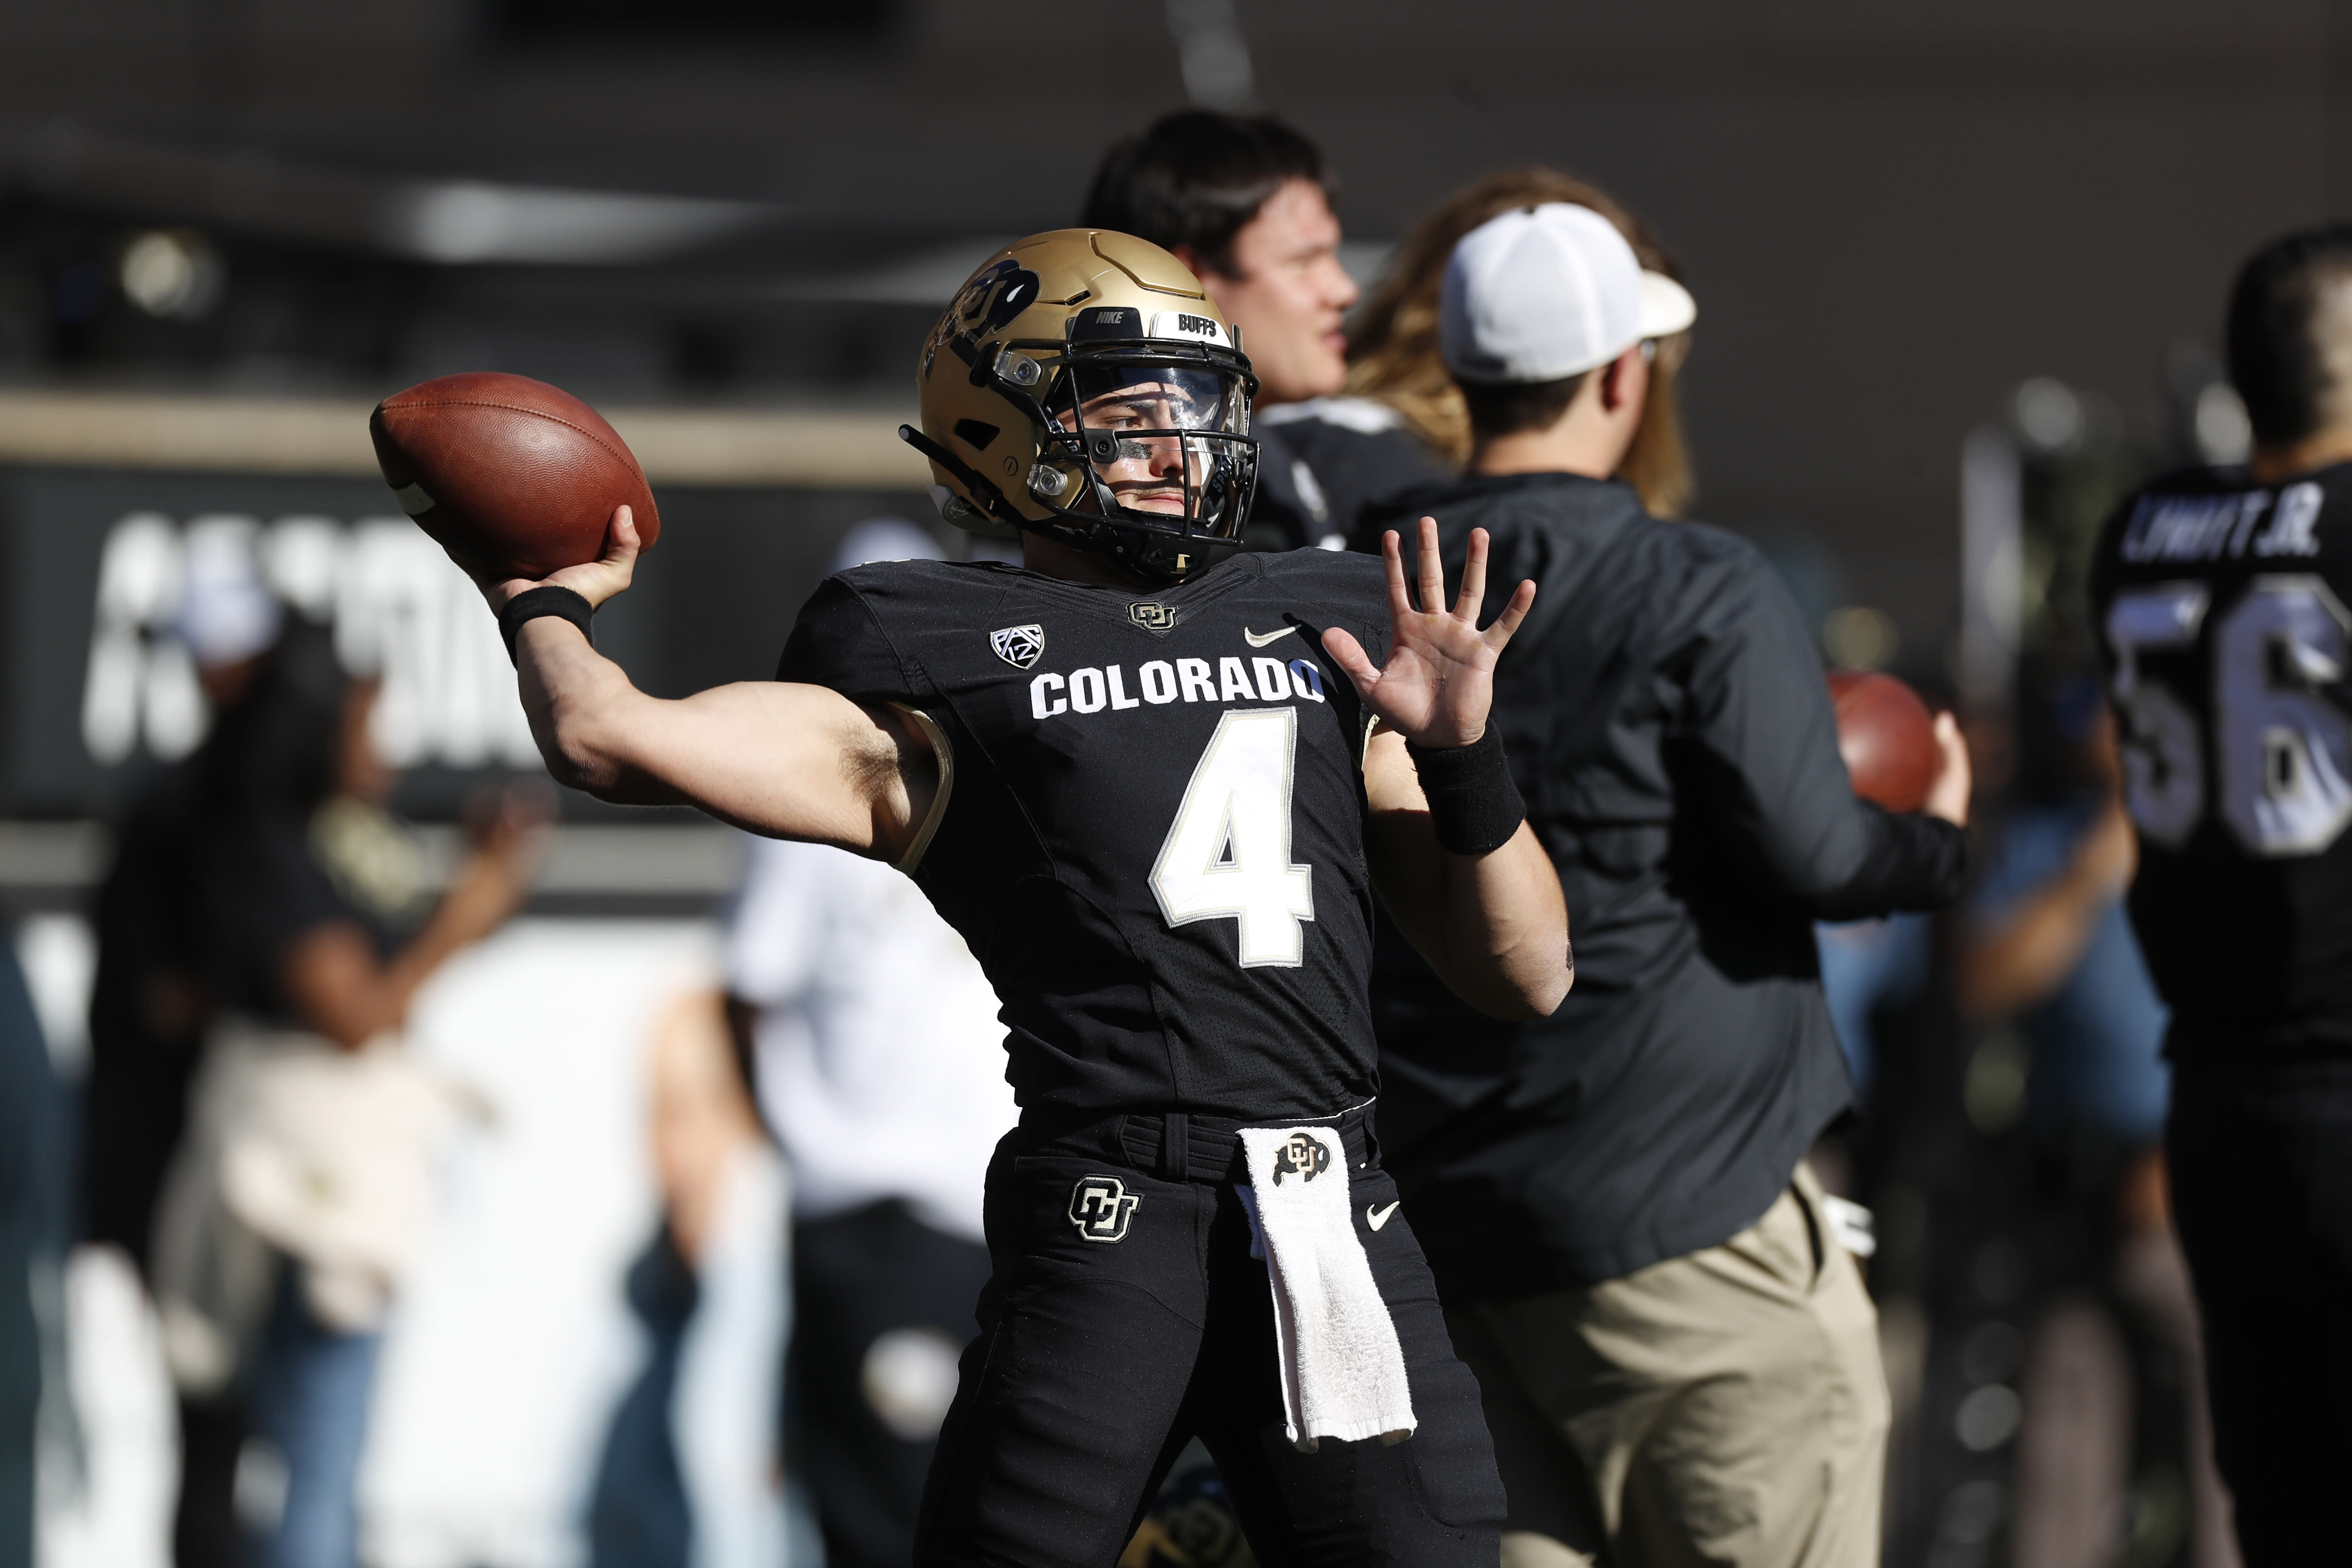 At home: Sam Noyer returns to Colorado with chance at QB job